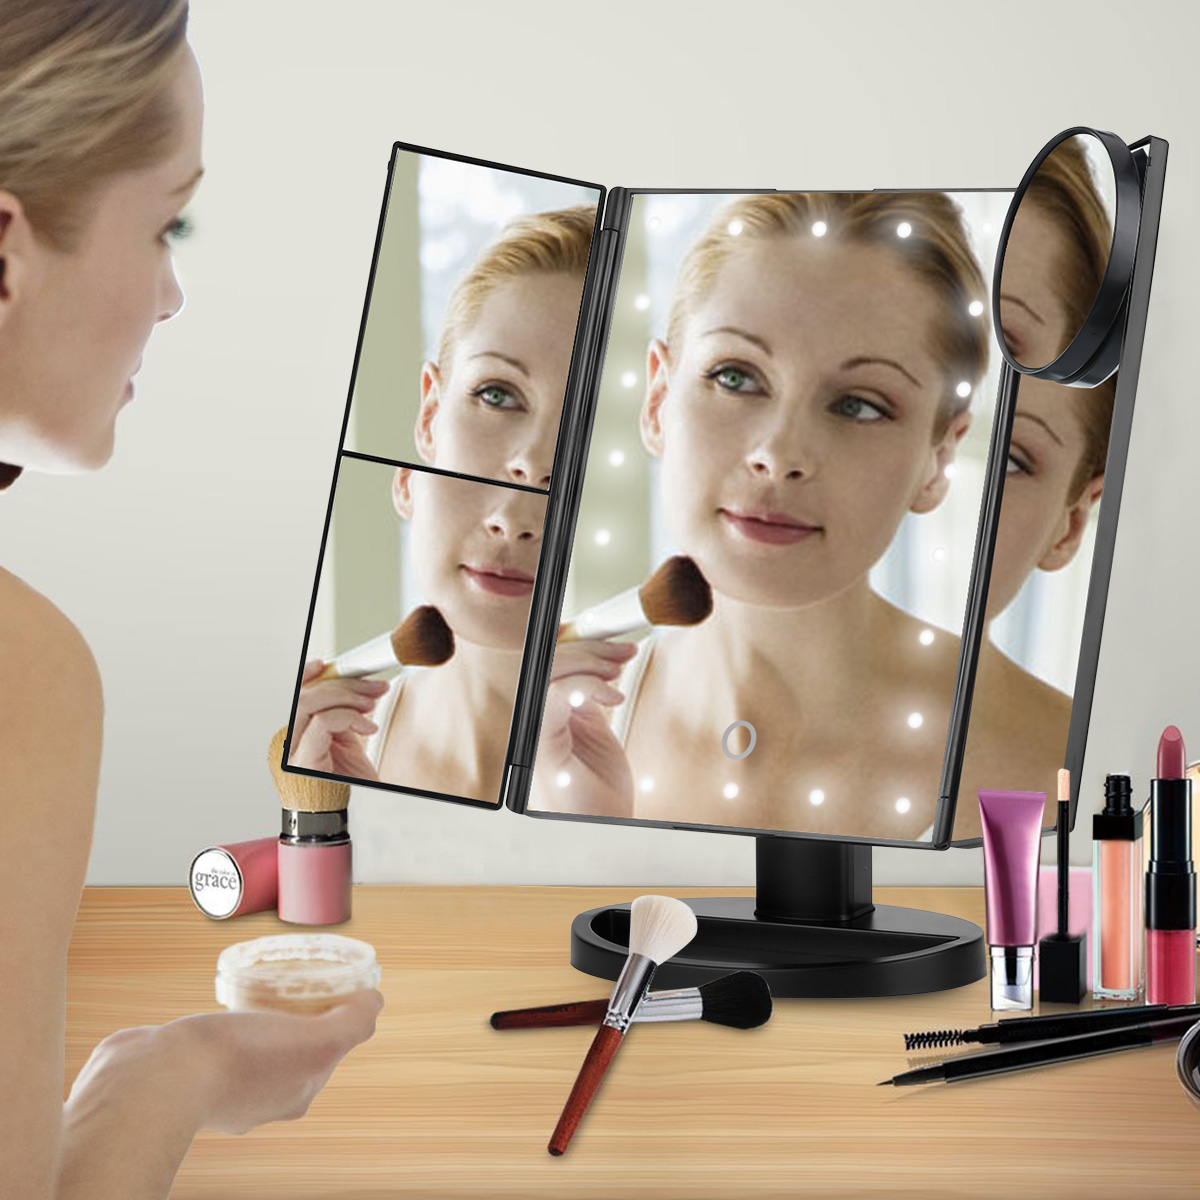 Fitnate 22 LEDs Vanity Mirror Hollywood Makeup Mirror, 10X 3X 2X 1X Magnified 180 Rotatable Touch Light up Battery/USB Powered - image 7 of 8